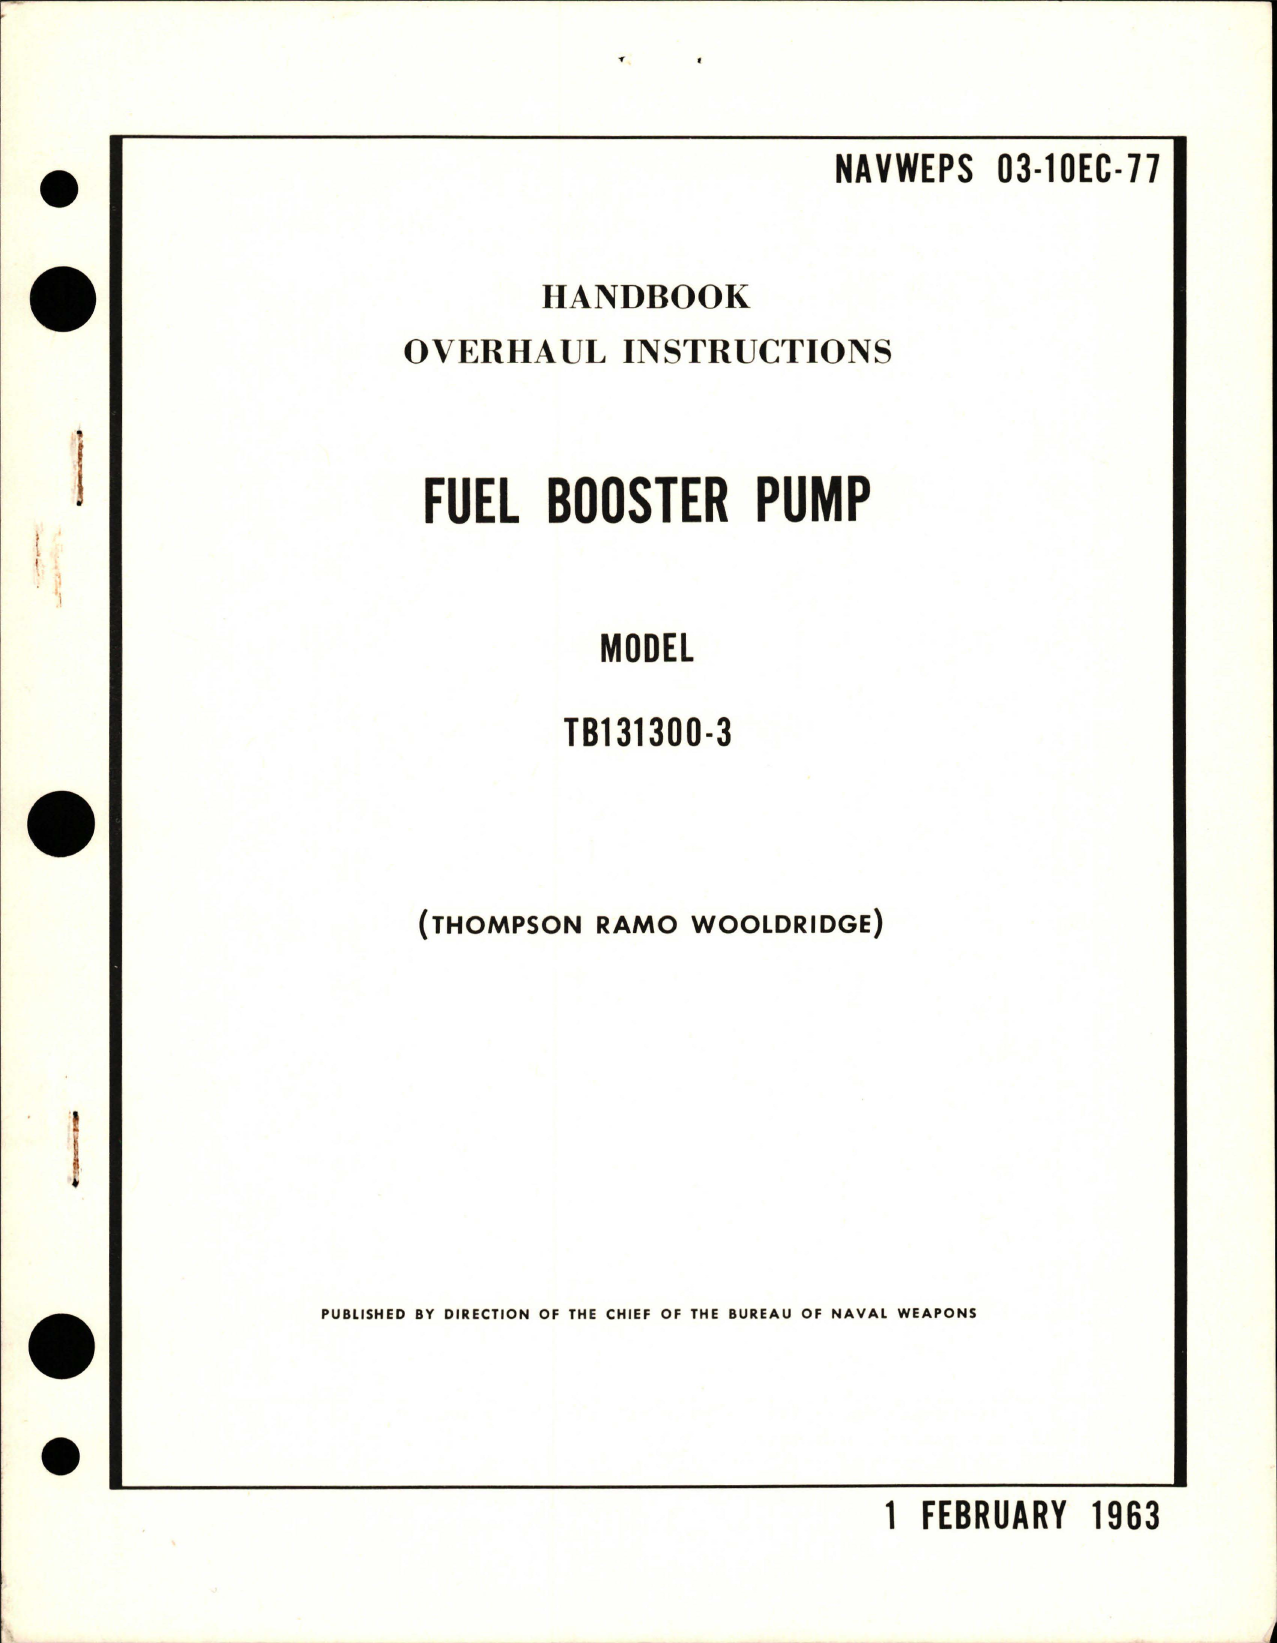 Sample page 1 from AirCorps Library document: Overhaul Instructions for Fuel Booster Pump - Model TB131300-3